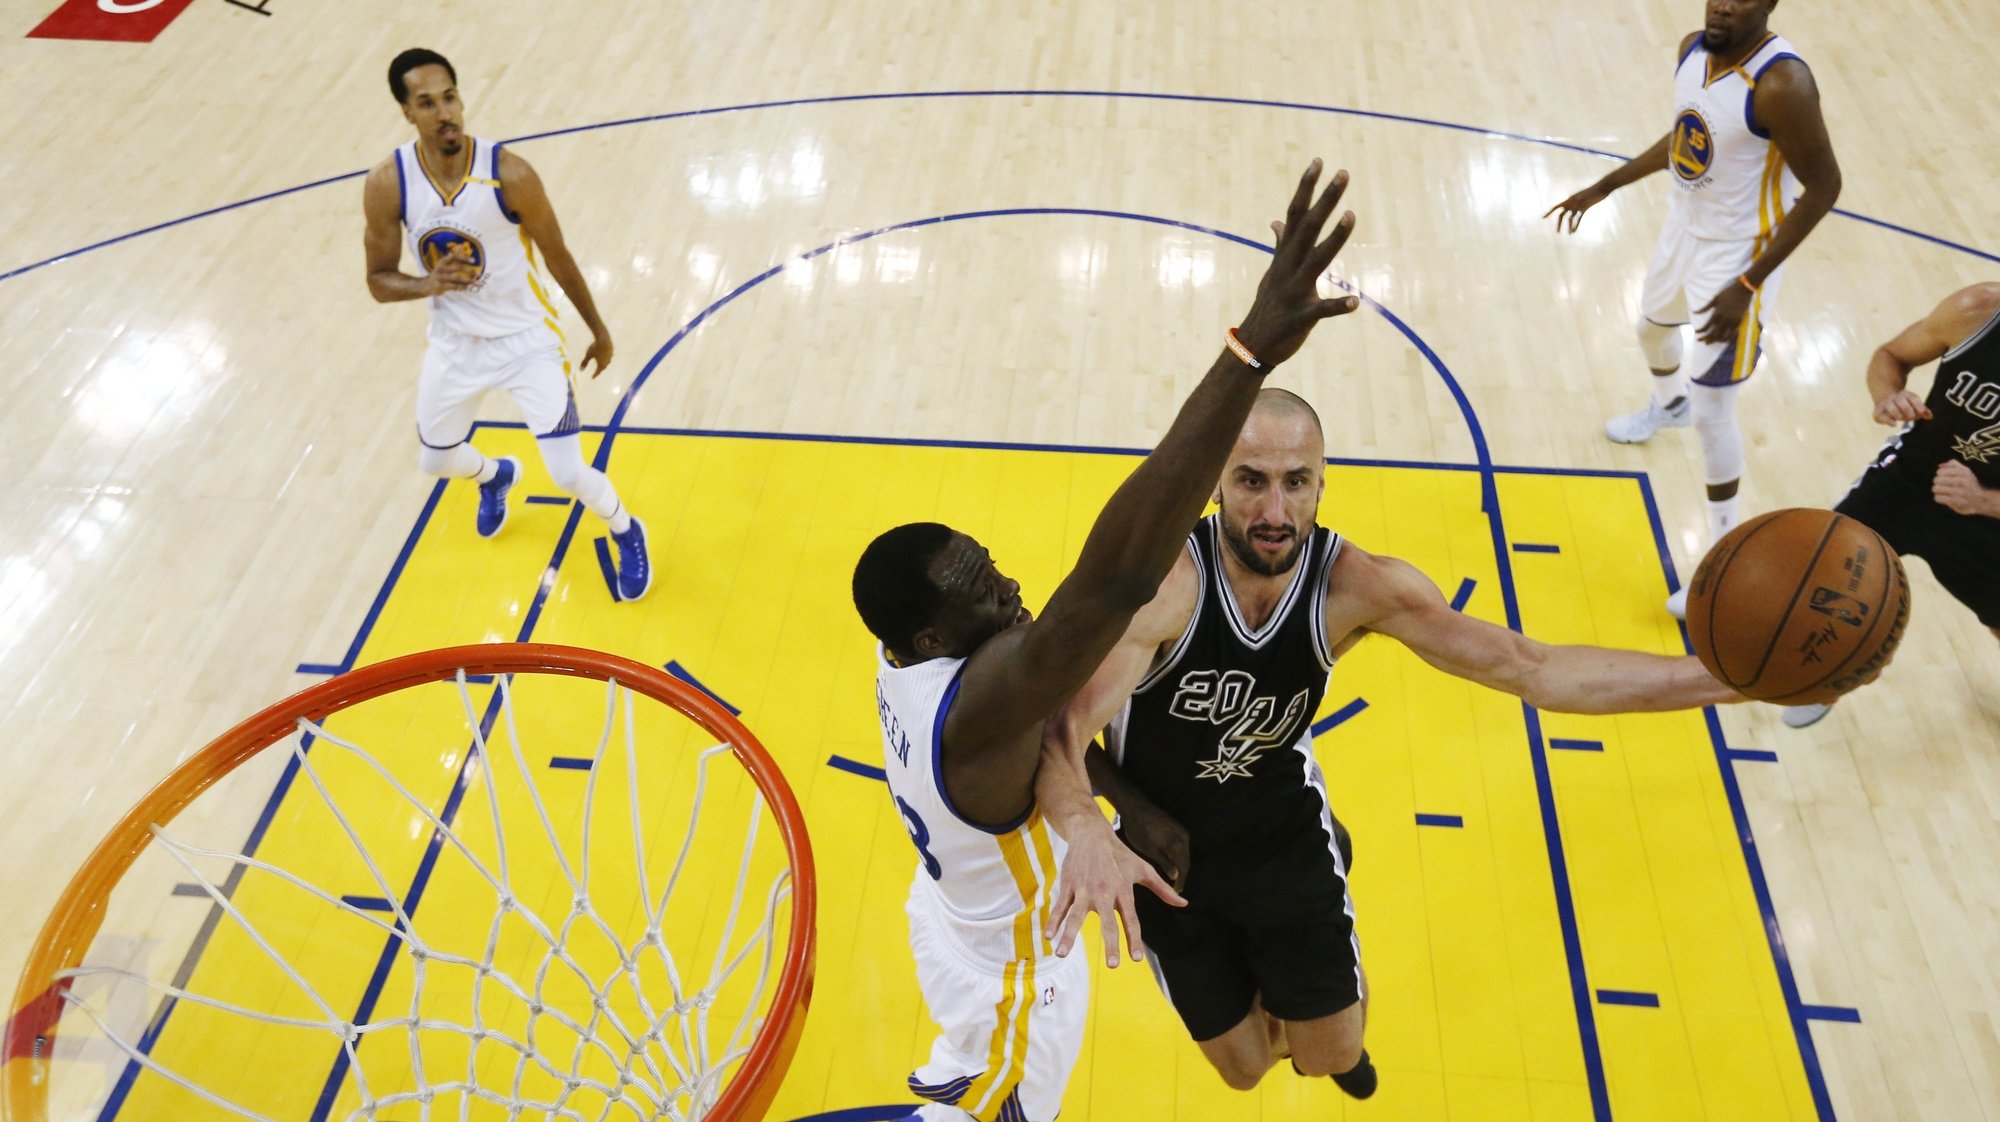 epa05968726 San Antonio Spurs guard Manu Ginobili of Argentina (R) goes to the basket as Golden State Warriors forward Draymond Green (L) defends during the NBA Western Conference Finals basketball game two between the San Antonio Spurs and the Golden State Warriors at Oracle Arena in Oakland, California, USA, 16 May 2017.  EPA/MARCIO JOSE SANCHEZ / AP / POOL